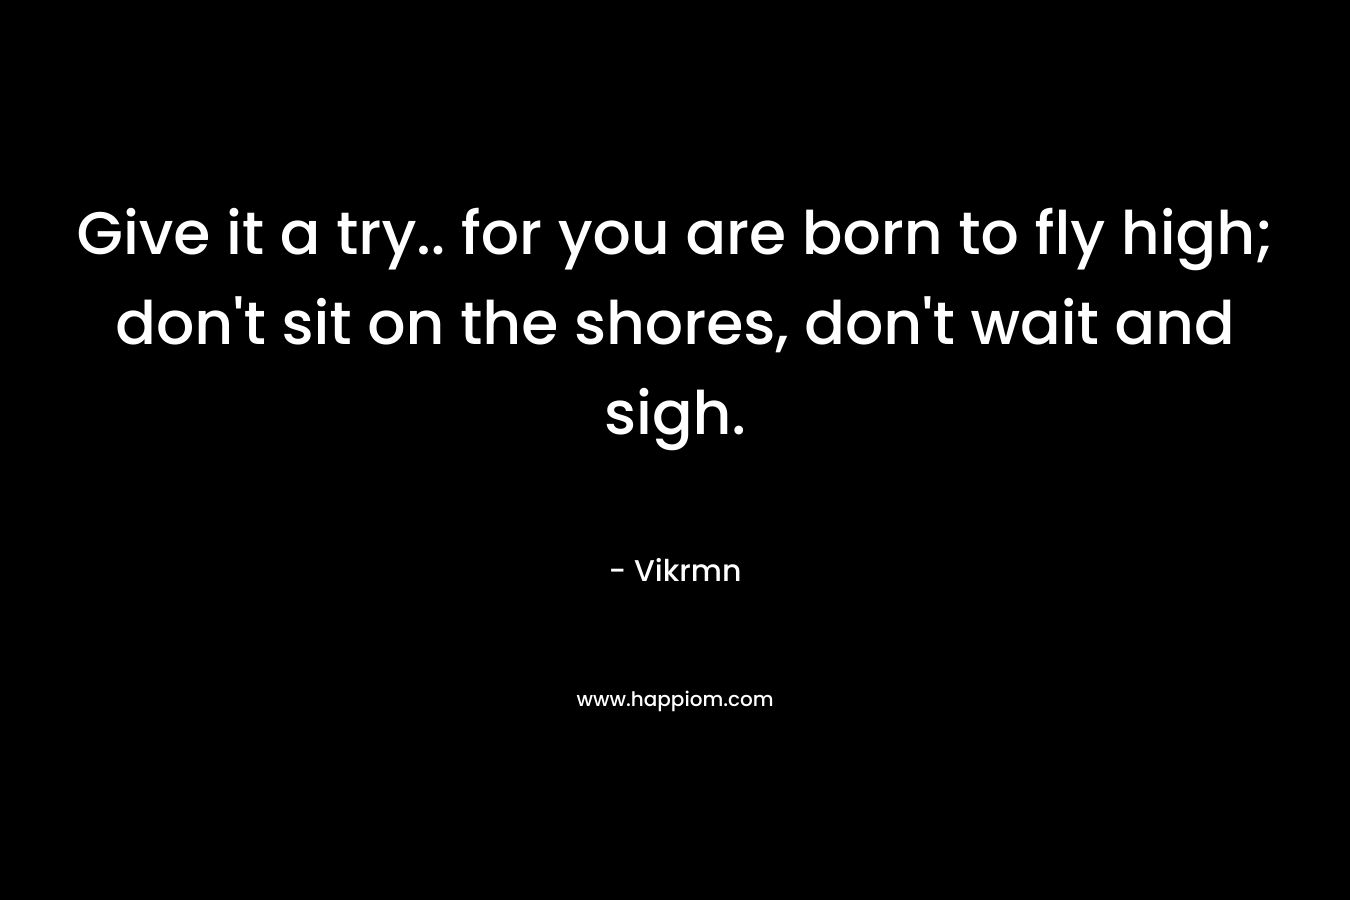 Give it a try.. for you are born to fly high; don't sit on the shores, don't wait and sigh.